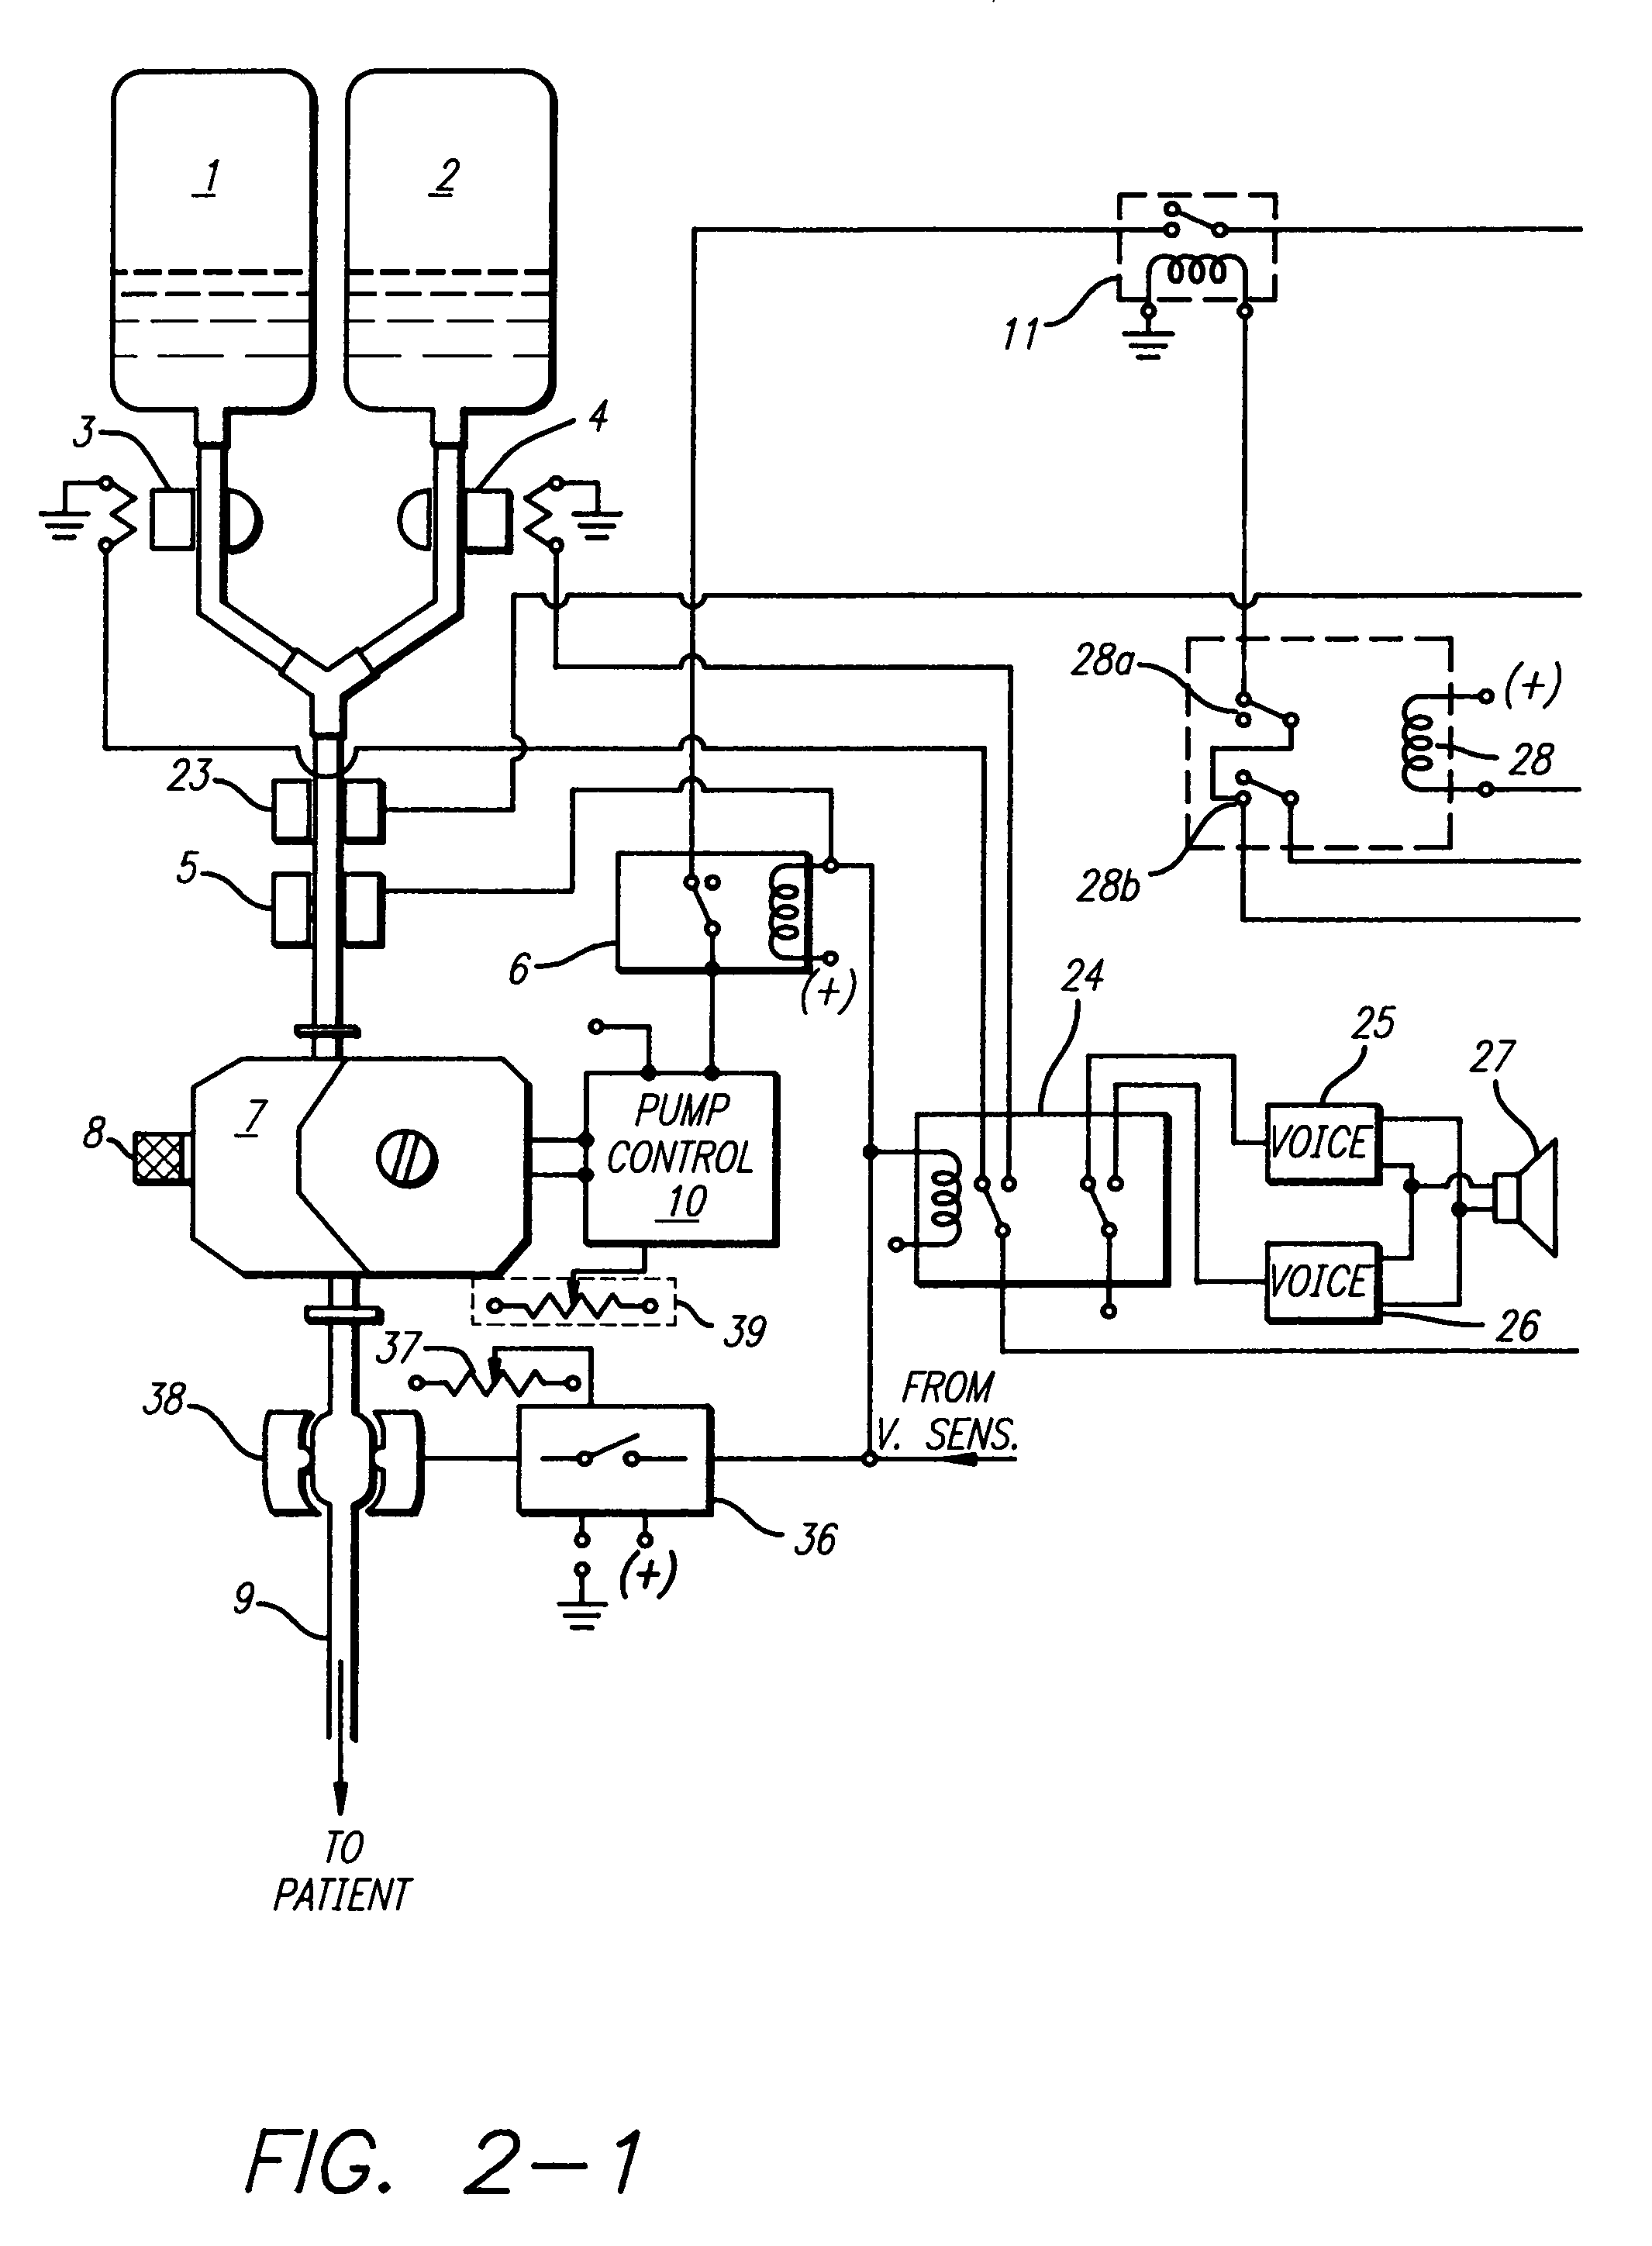 Automatic fluid control system for use in open and laparoscopic laser surgery and electrosurgery and method therefor